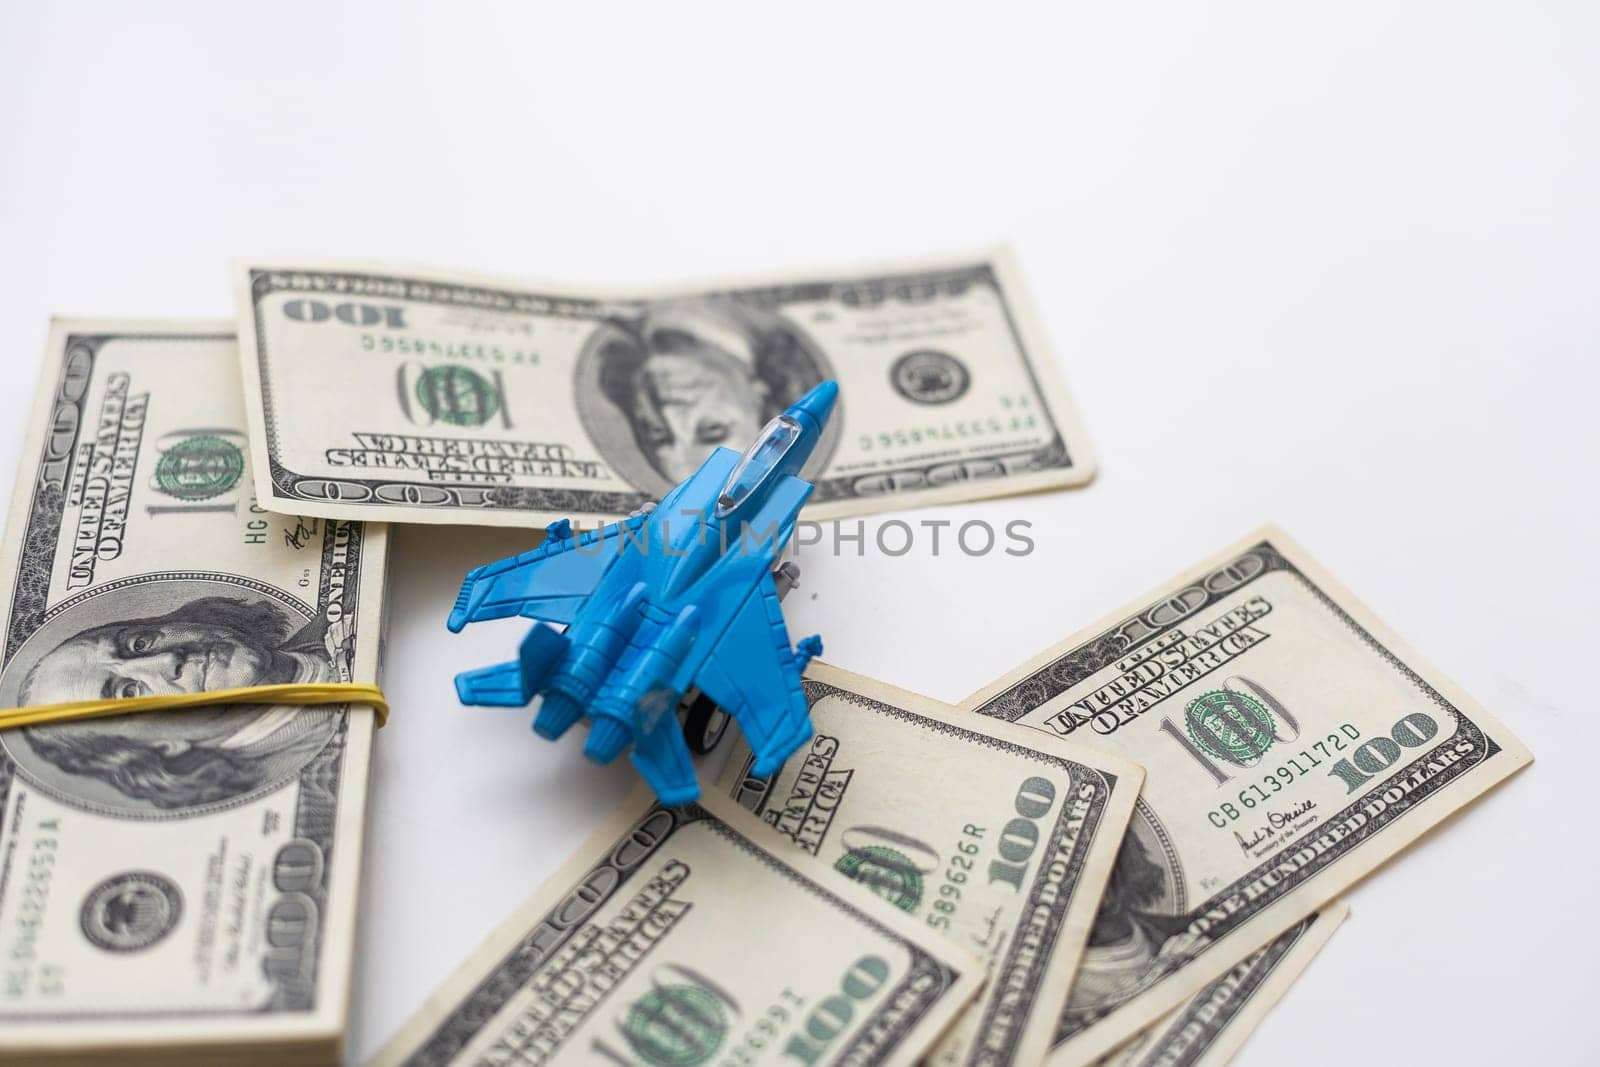 Toy plane and money on background. Travel insurance. High quality photo